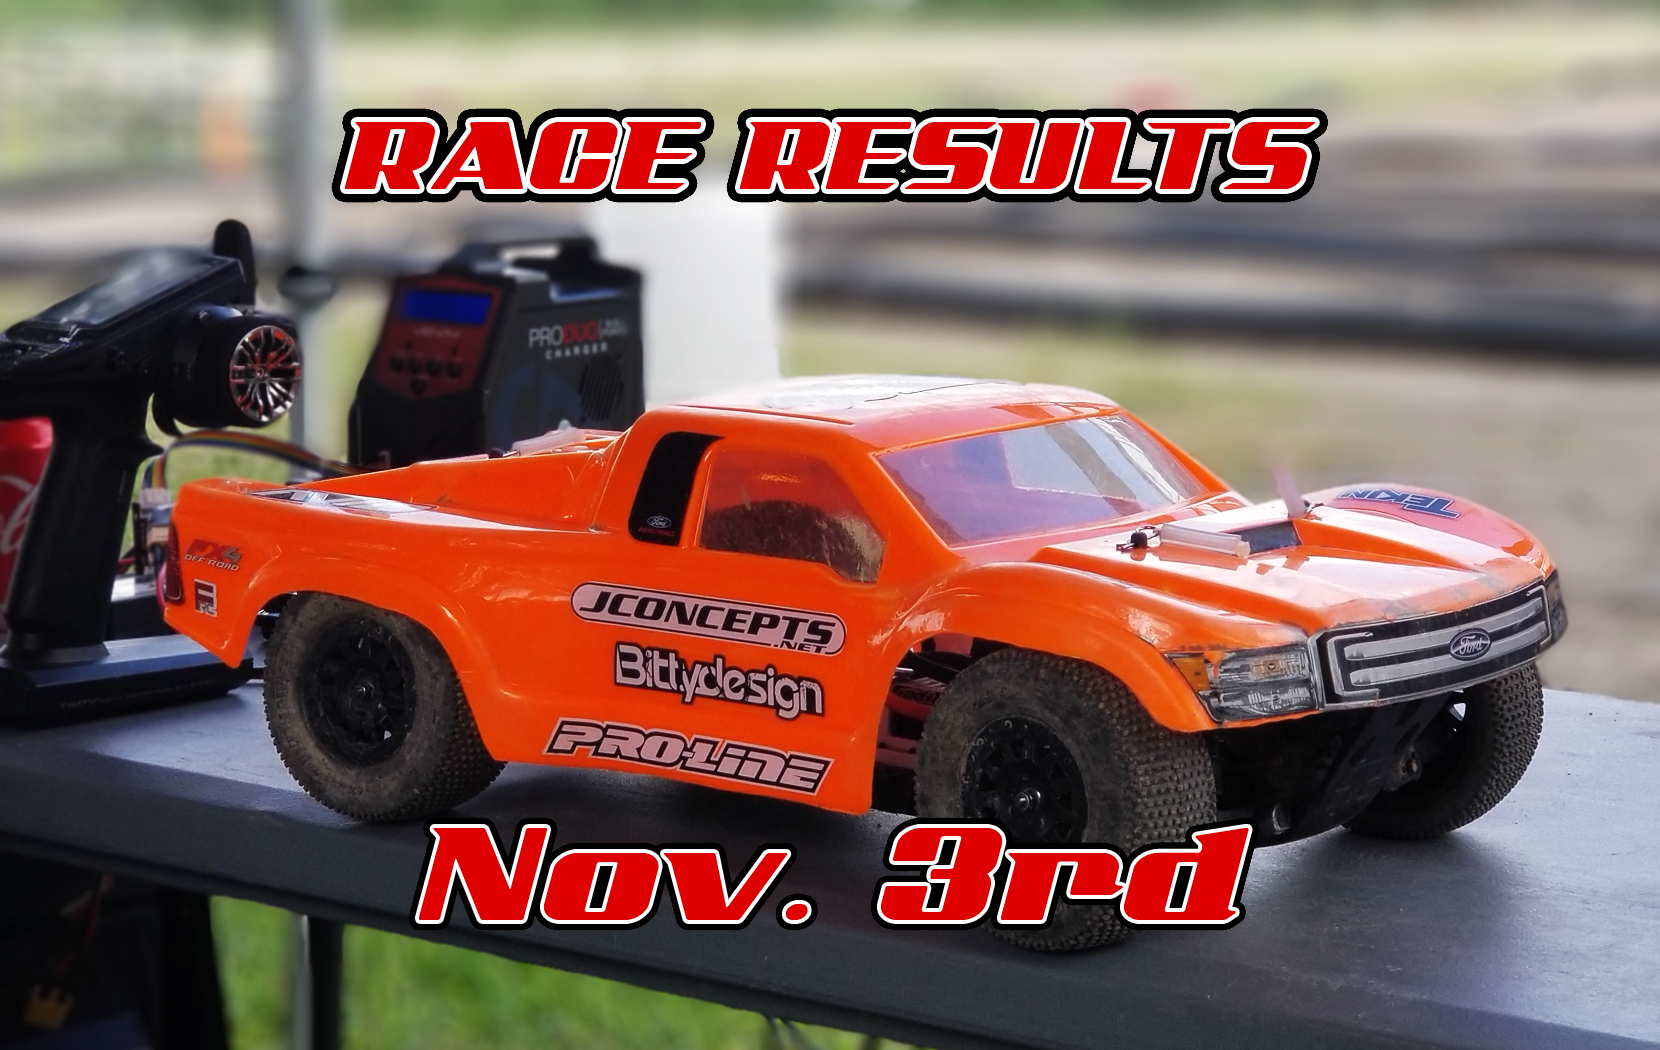 2019 hudy race results prolevel rc